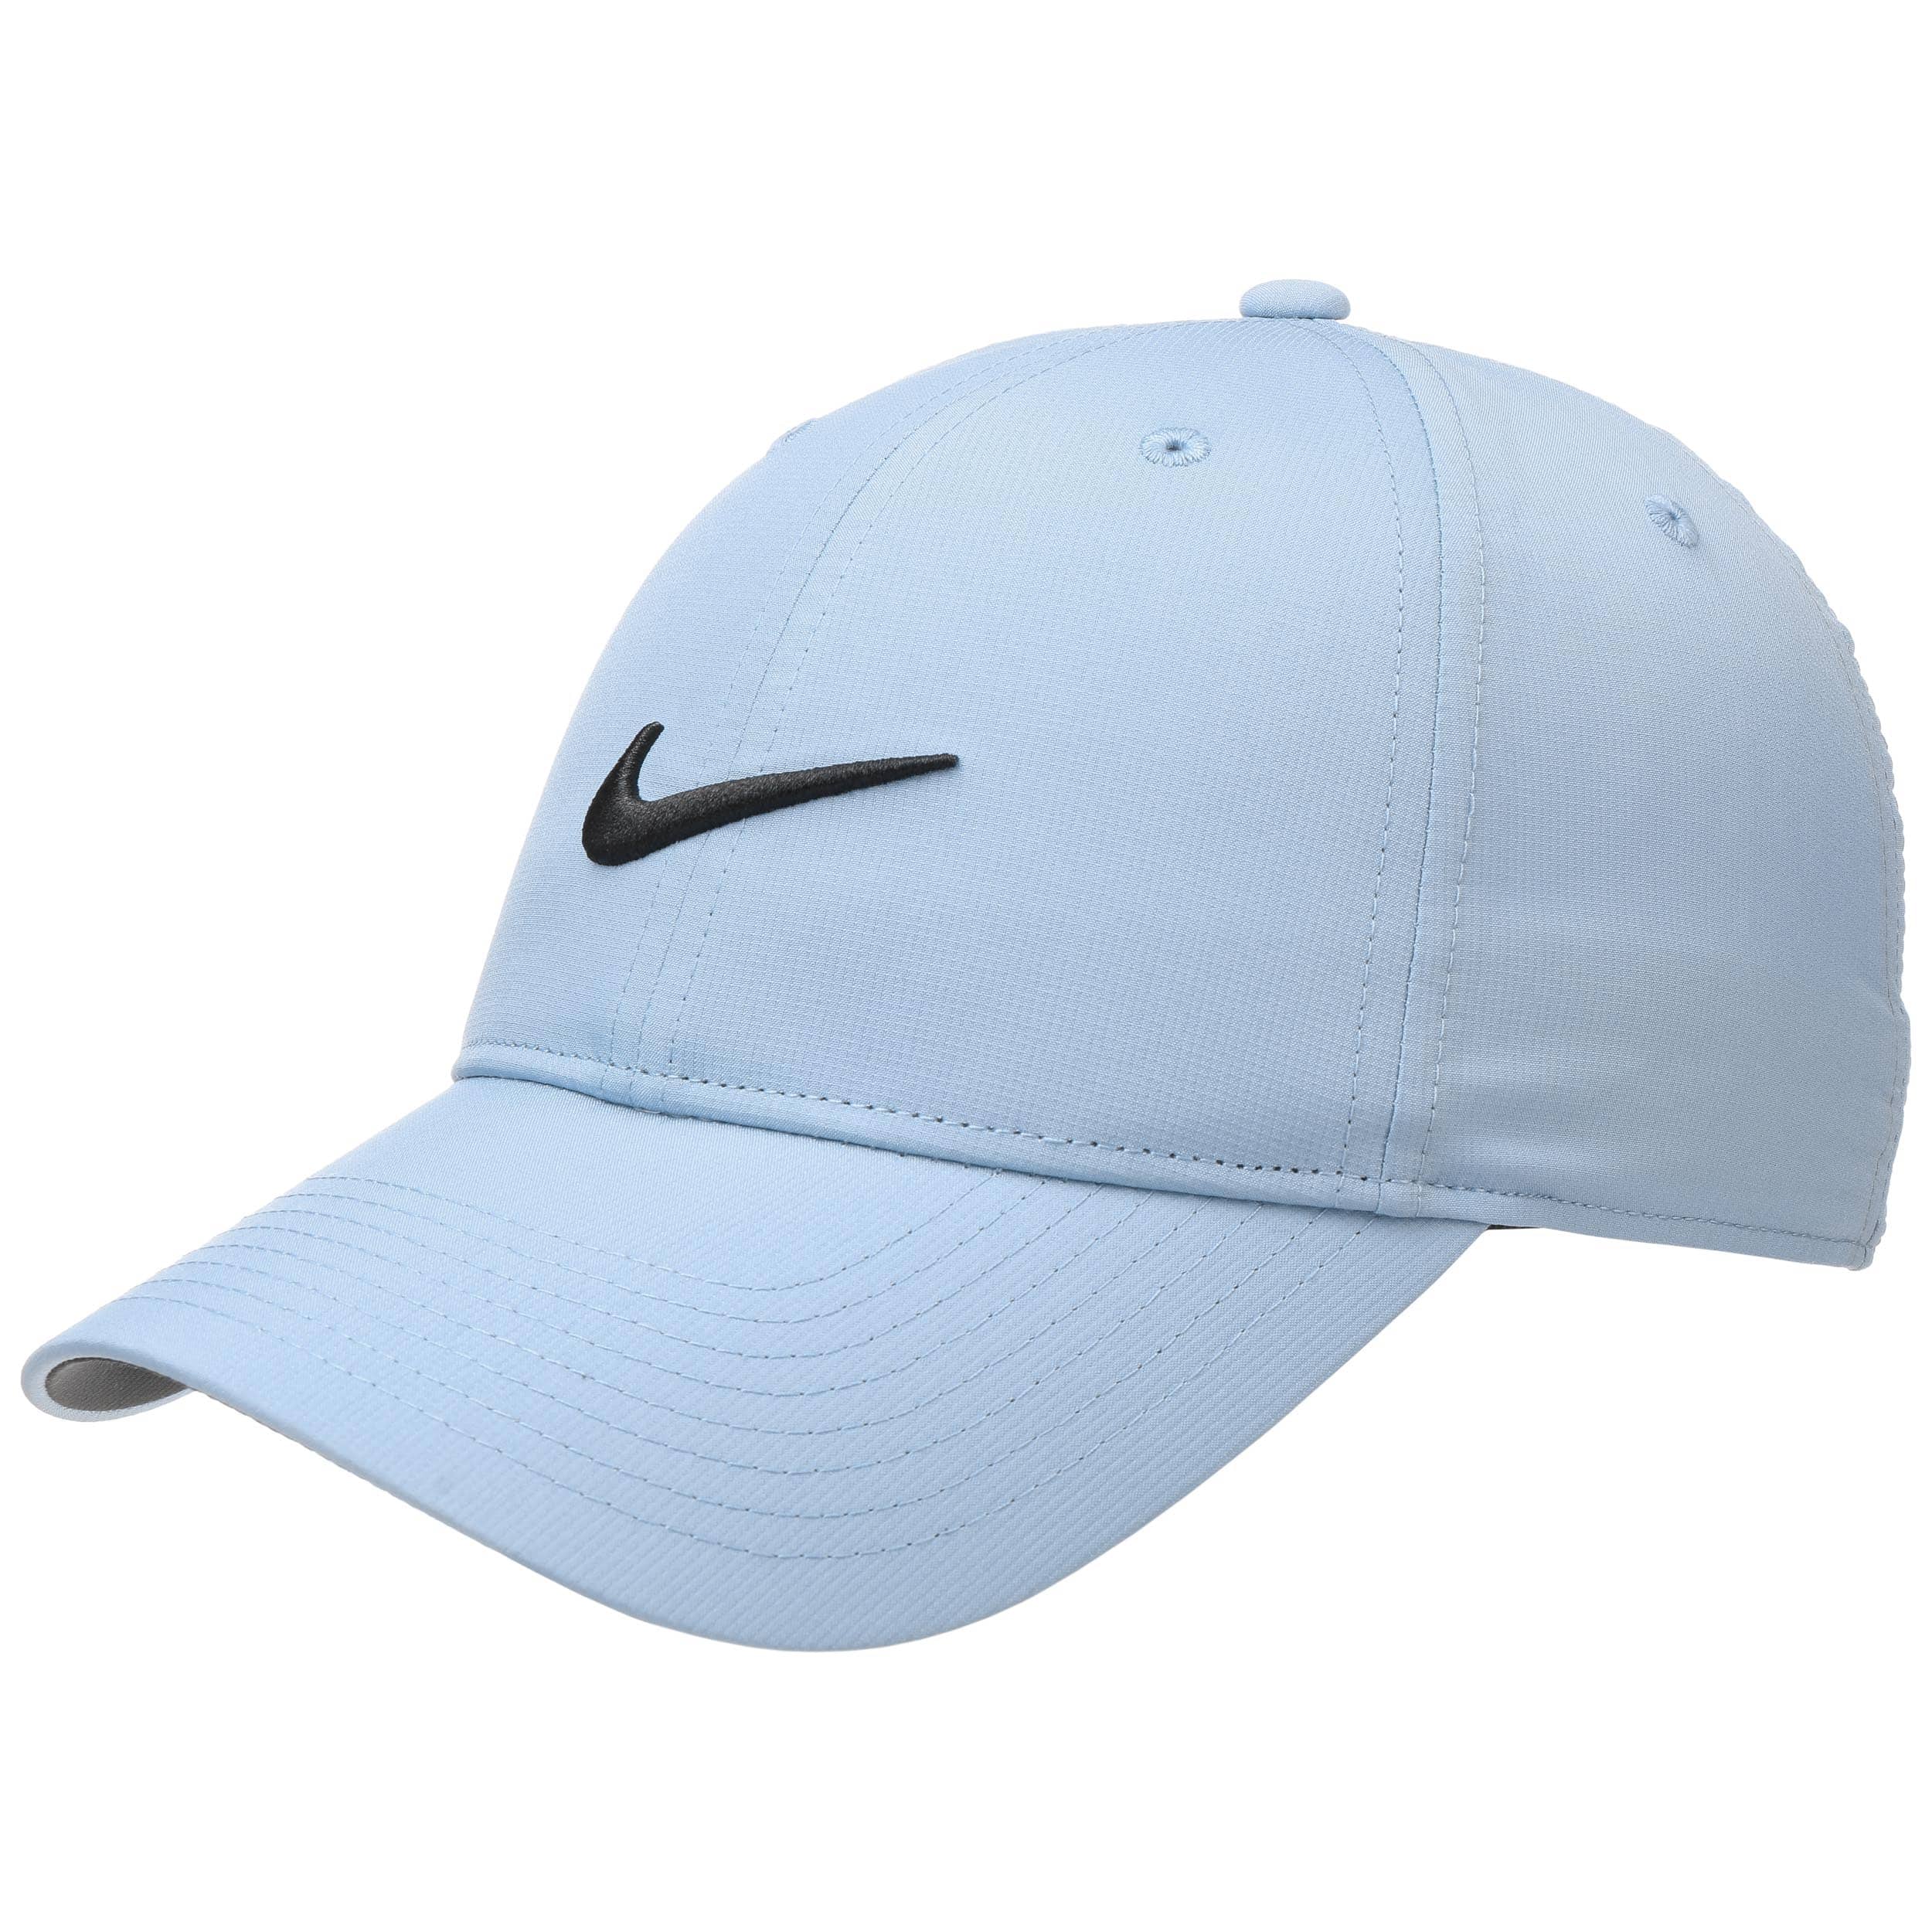 New Legacy 91 Cap by Nike - 21,95